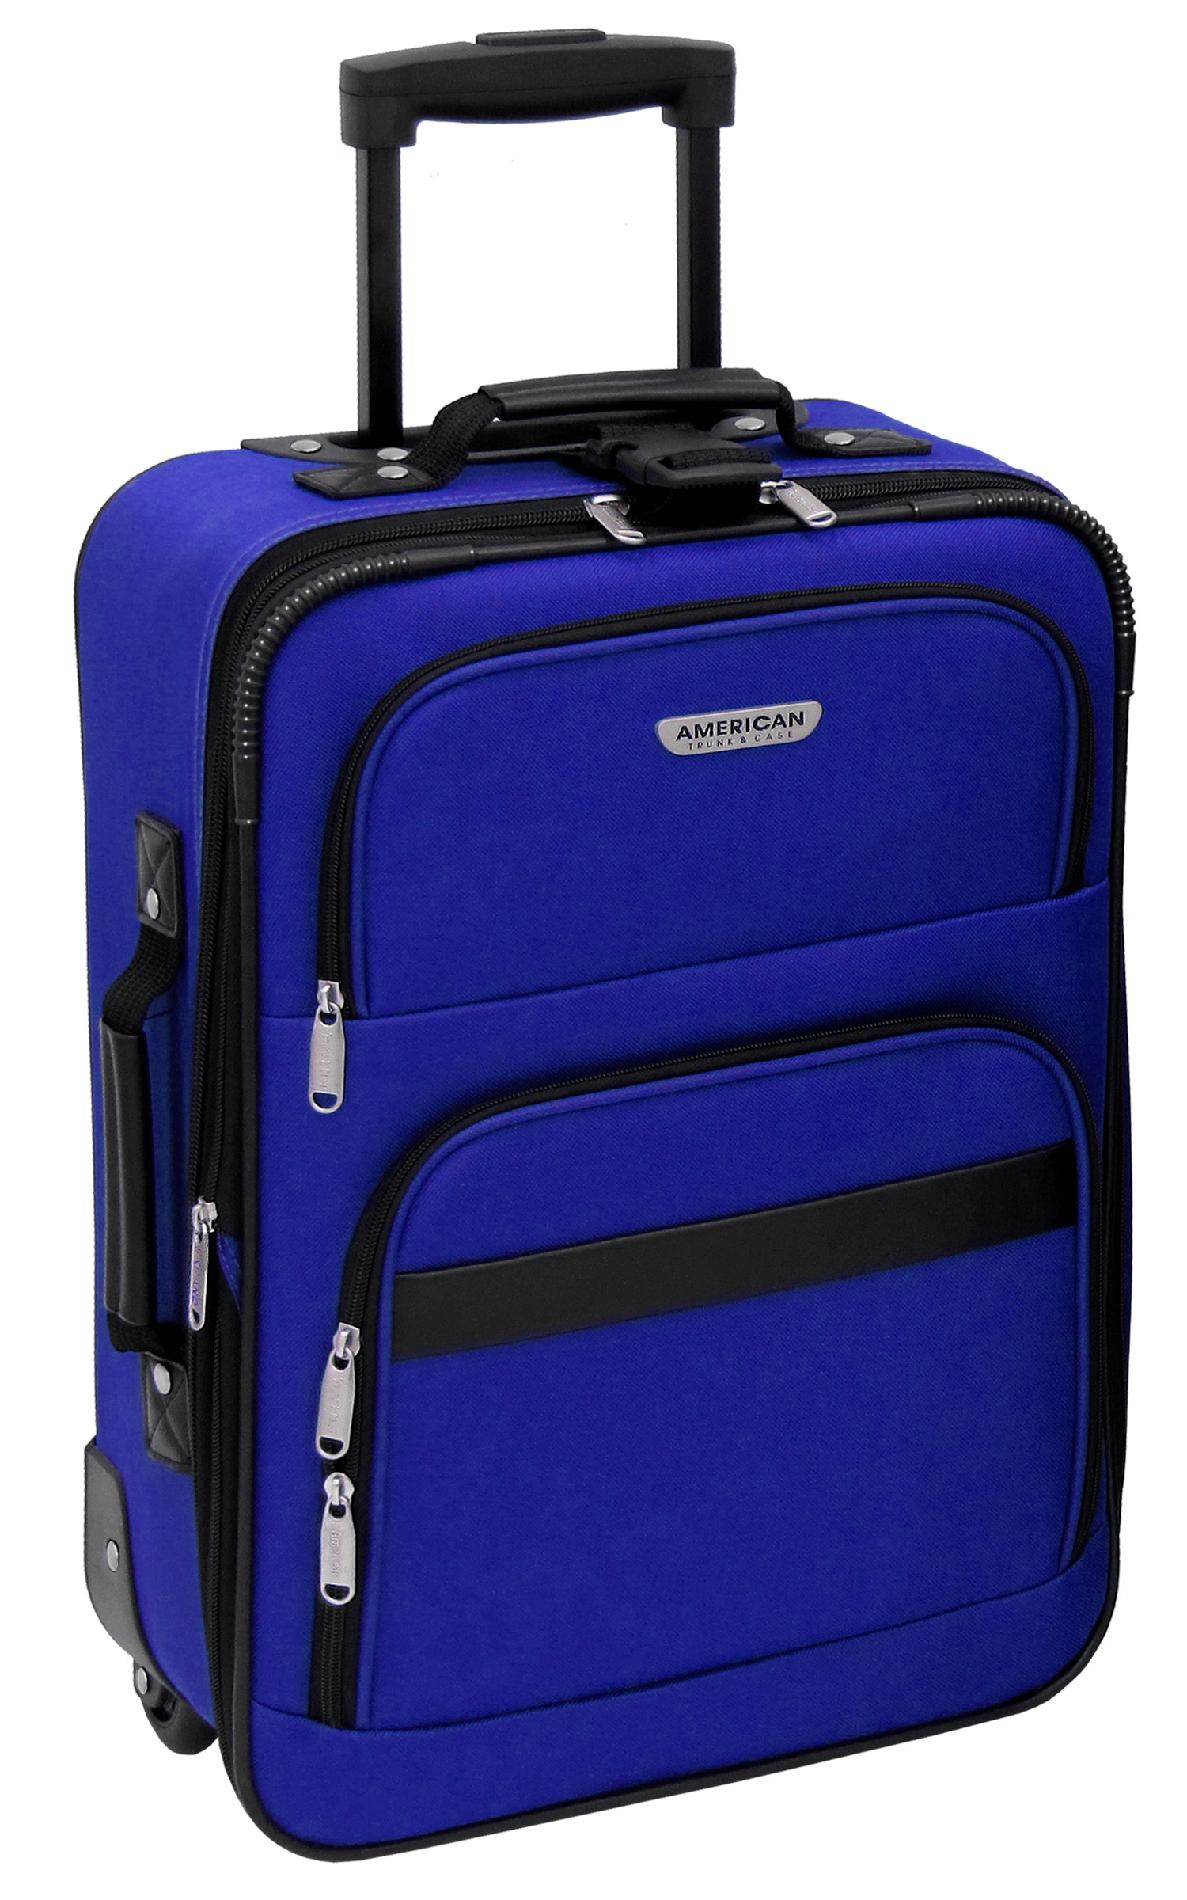 American Trunk & Case Capri II Collection 21-in Carry-On